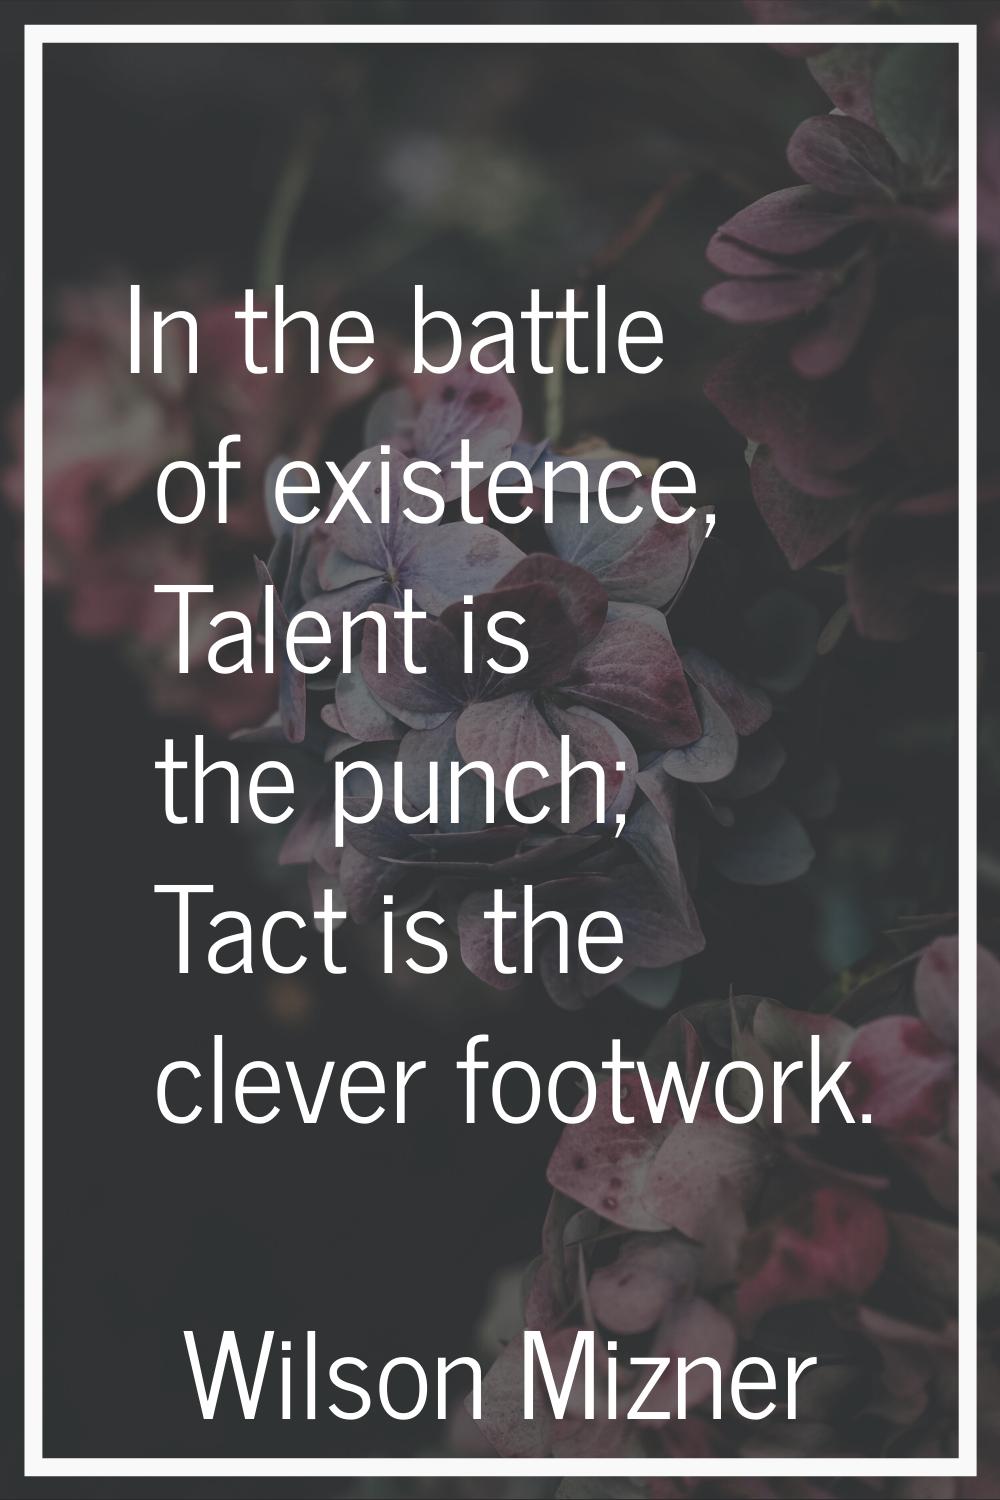 In the battle of existence, Talent is the punch; Tact is the clever footwork.